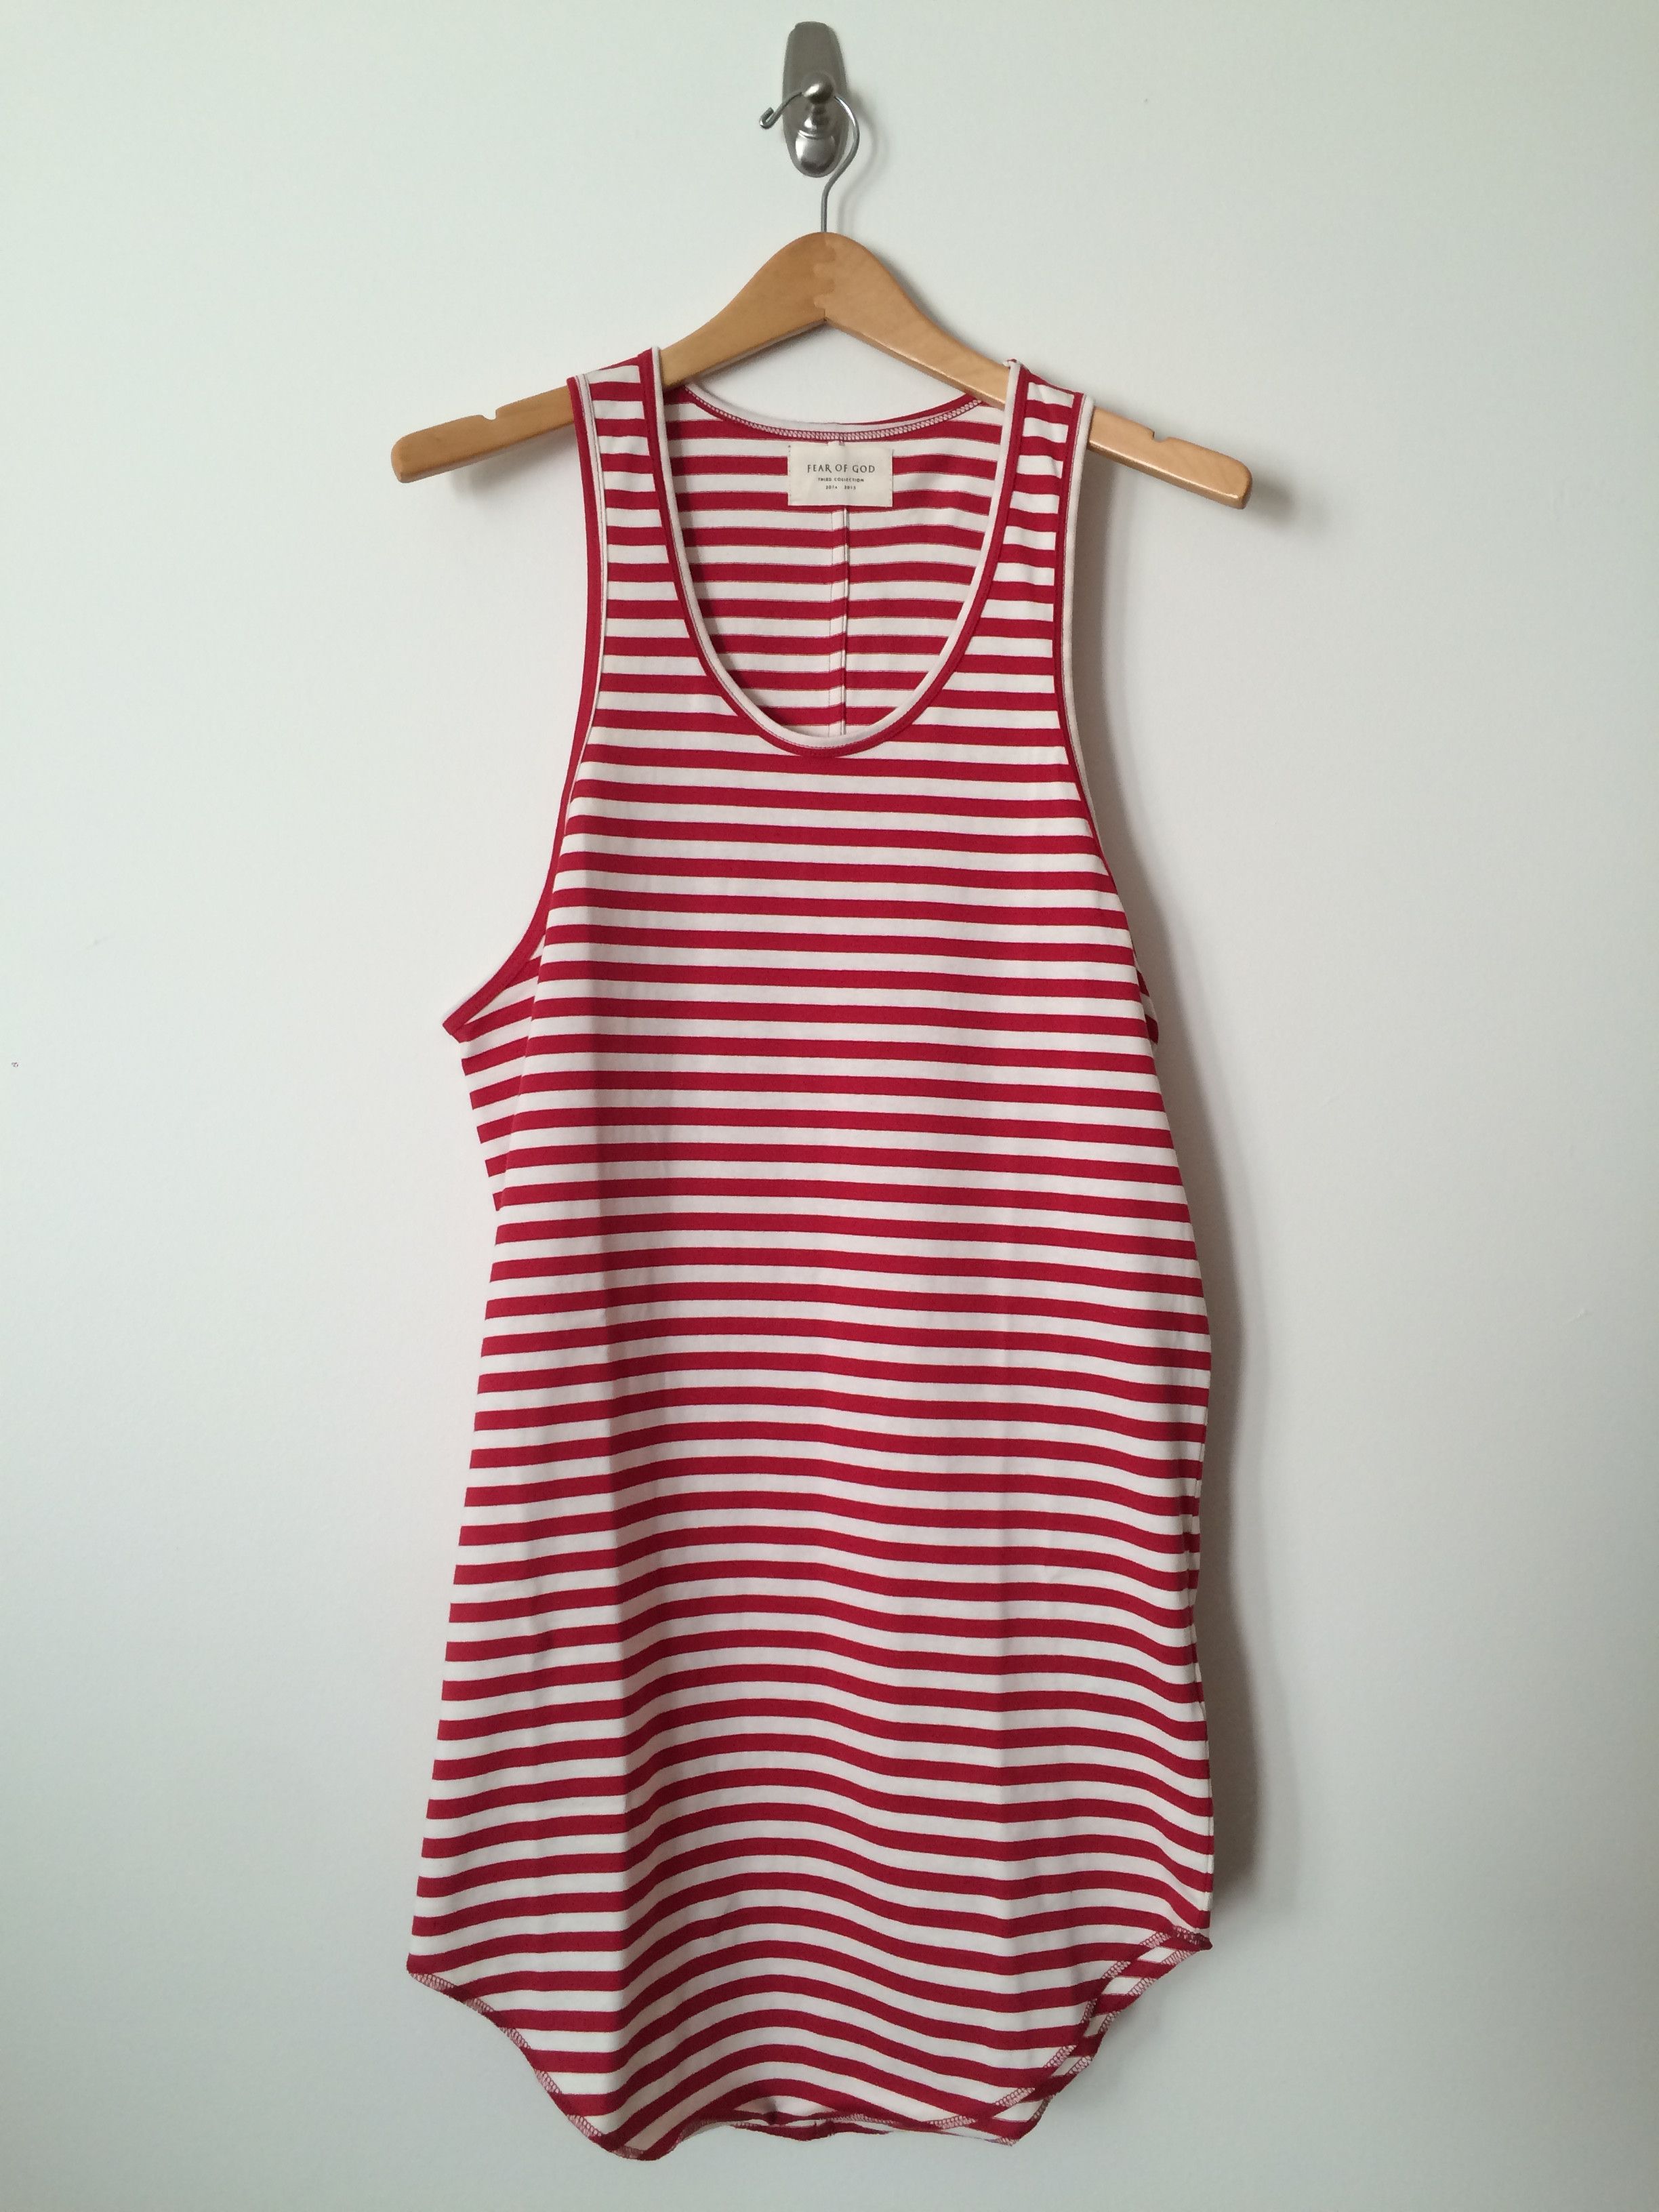 Fear of God Red Striped Tank Top | Grailed